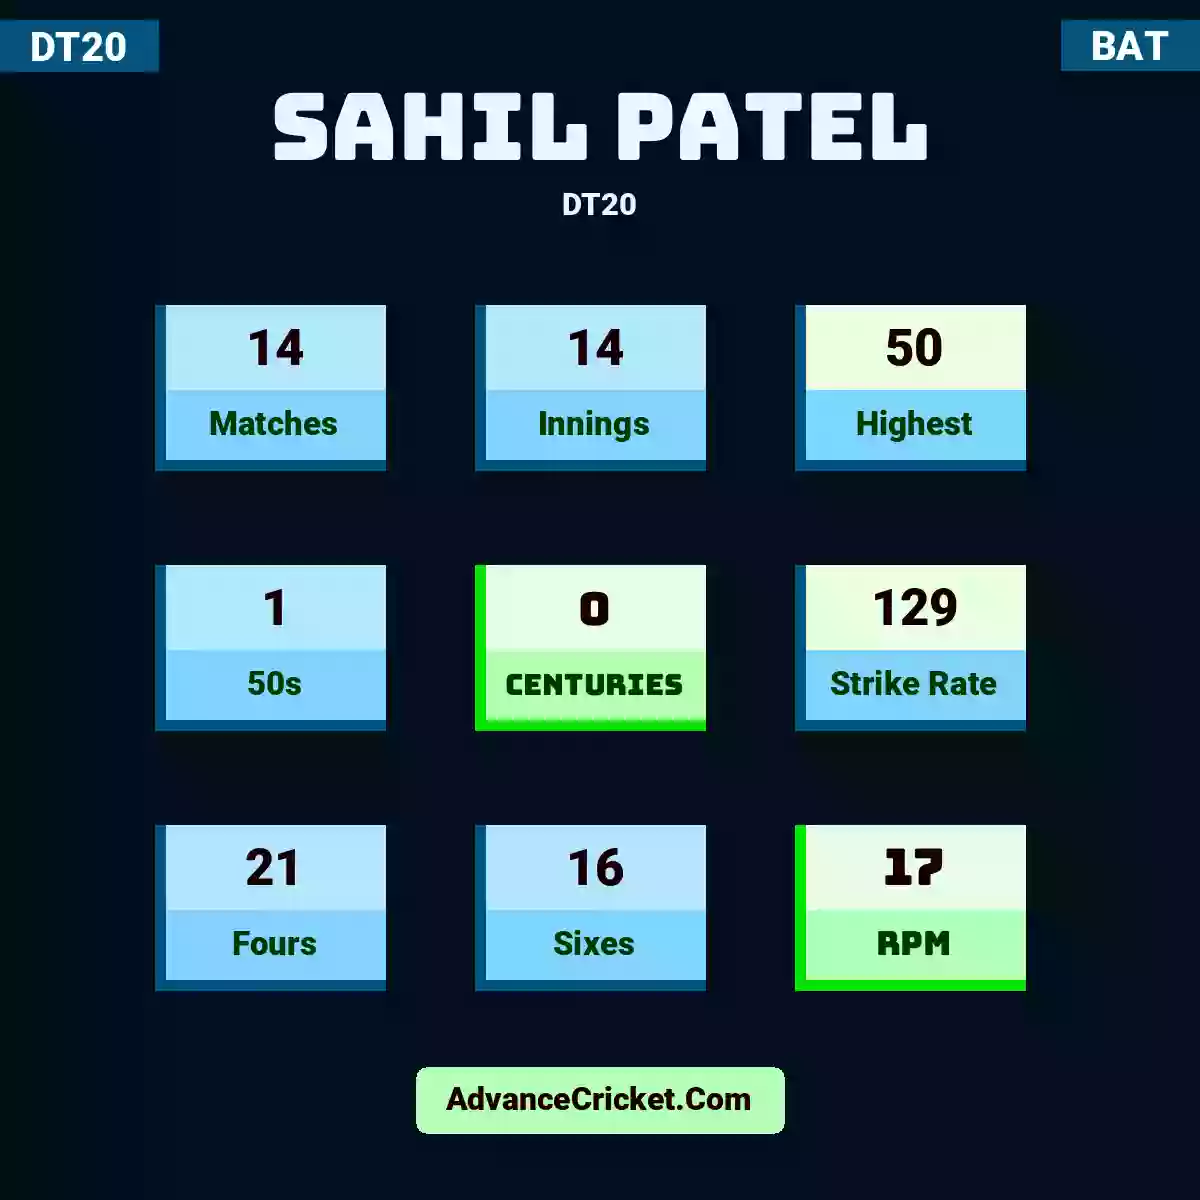 Sahil Patel DT20 , Sahil Patel played 14 matches, scored 50 runs as highest, 1 half-centuries, and 0 centuries, with a strike rate of 129. S.Patel hit 21 fours and 16 sixes, with an RPM of 17.